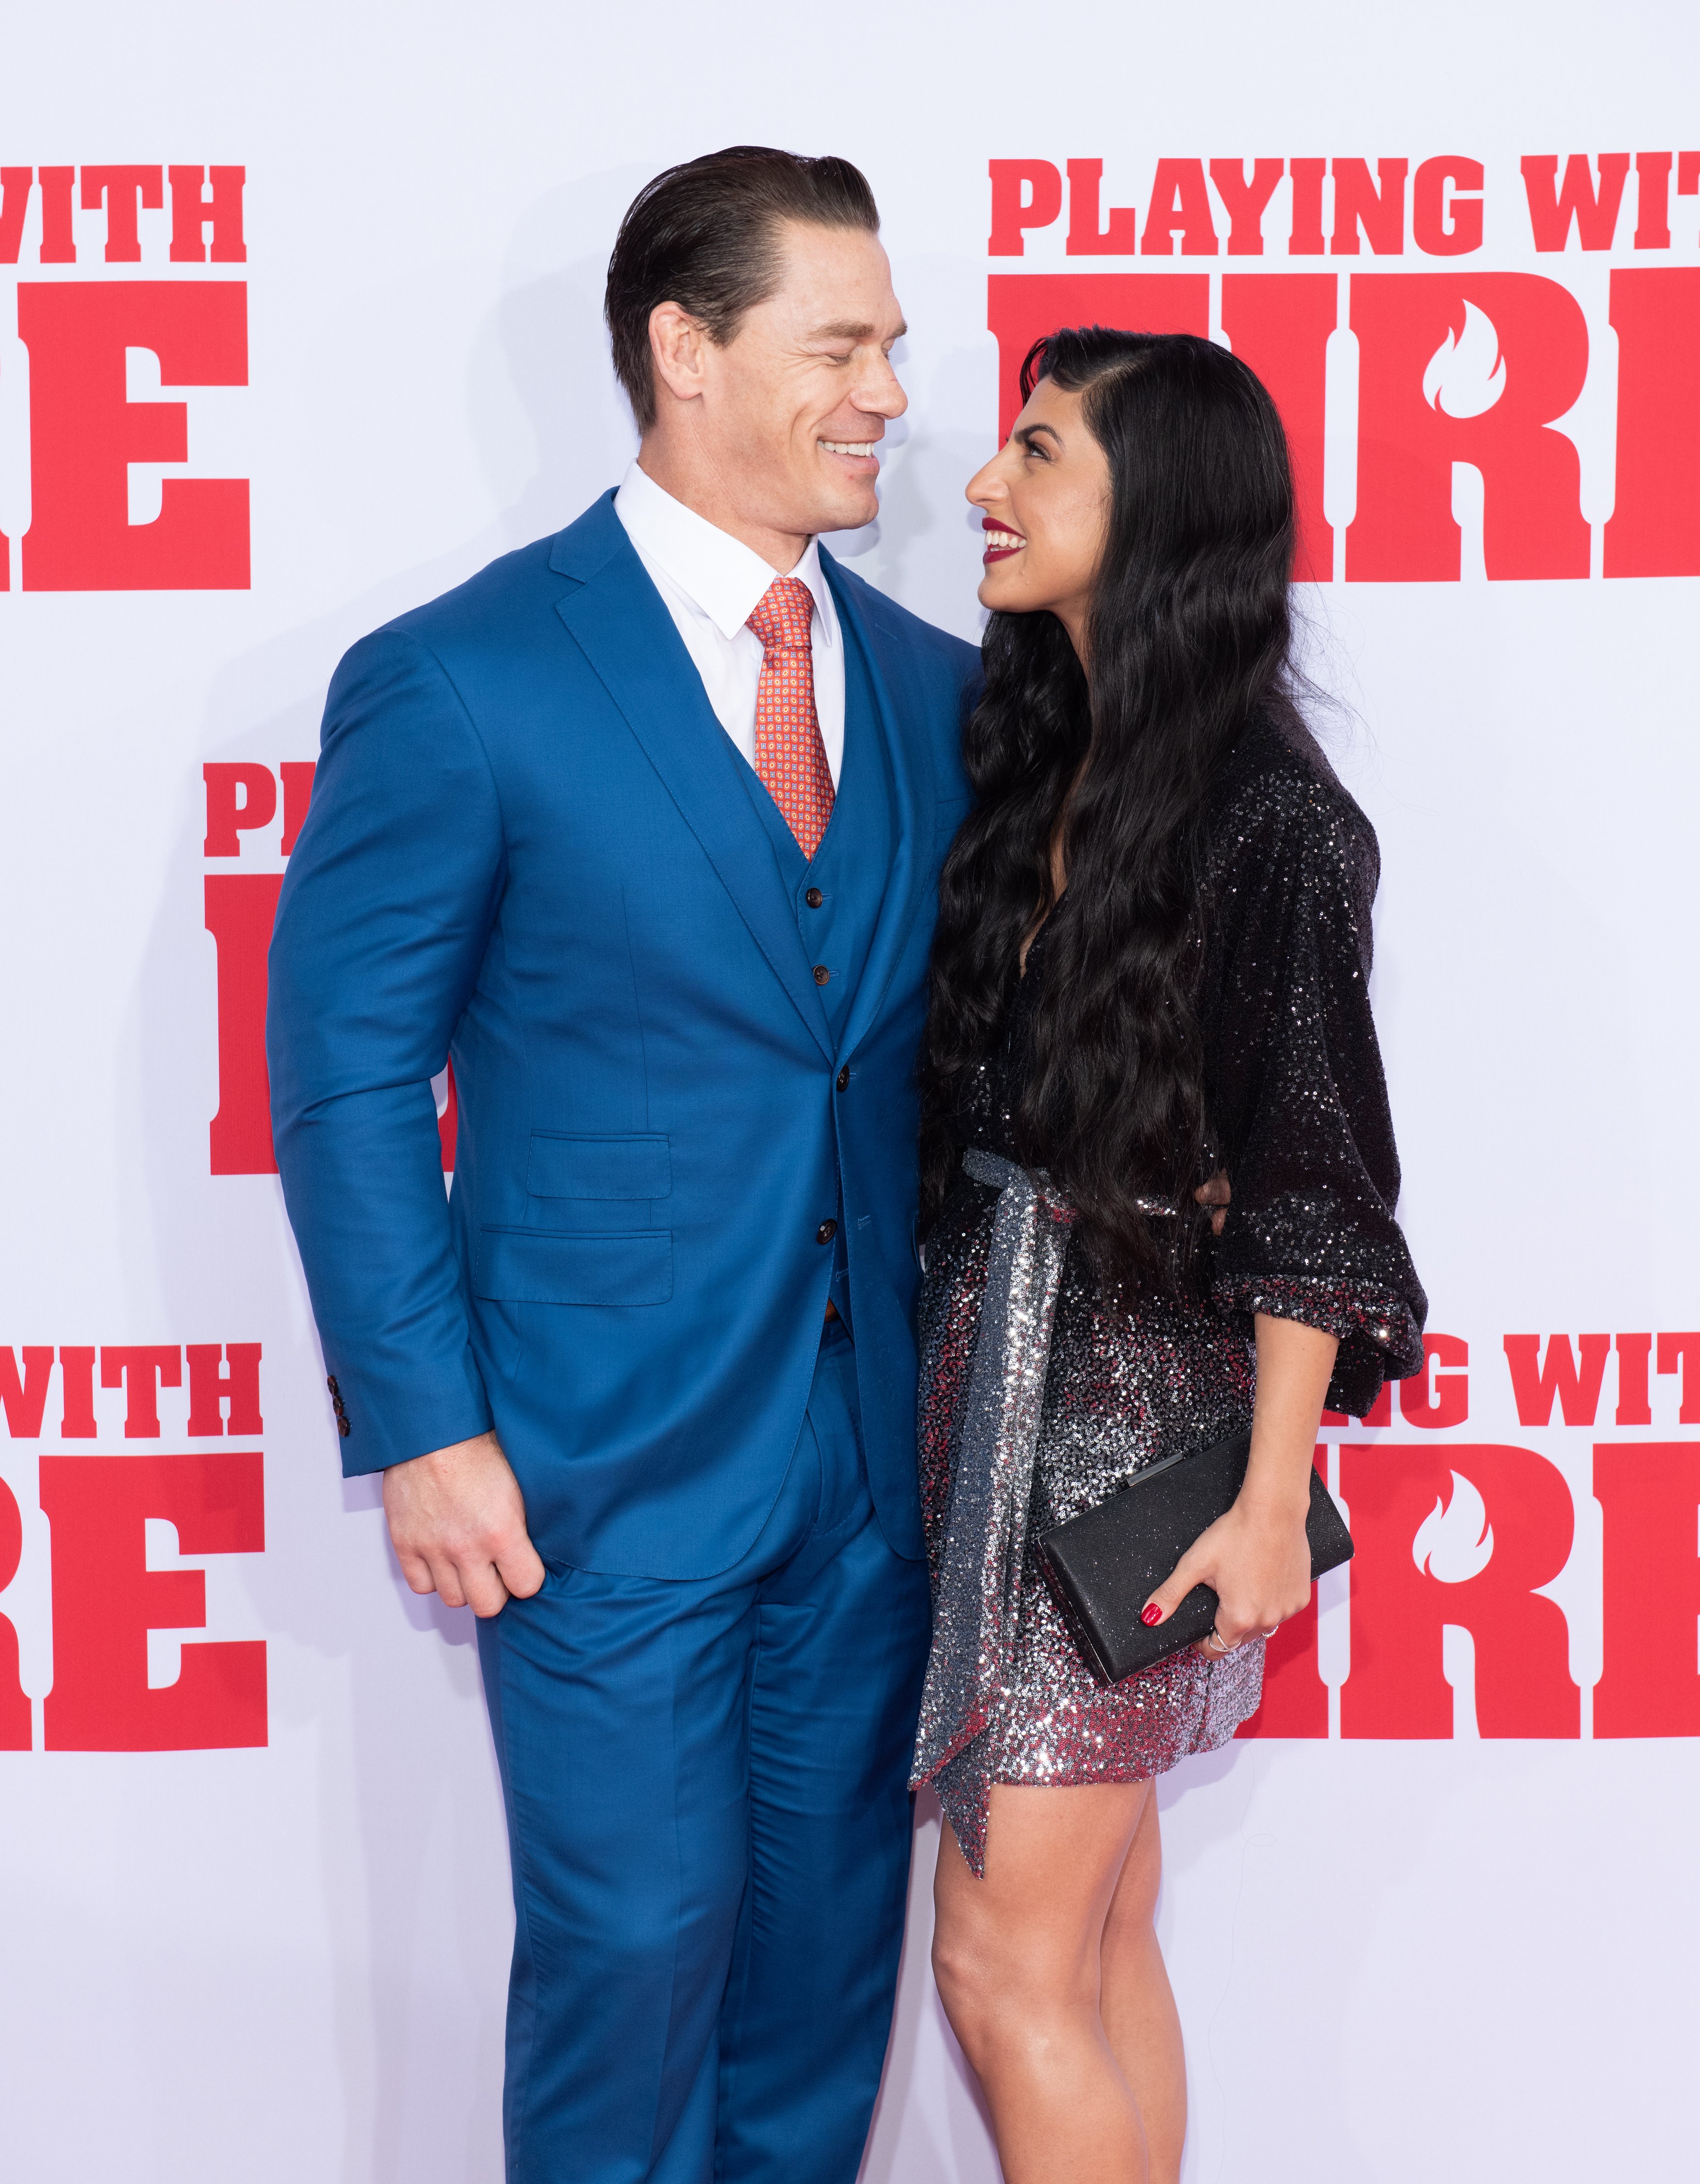 John Cena and girlfriend Shay Shariatzadeh at the "Playing With Fire" New York premiere on October 26, 2019. | Photo: Getty Images.